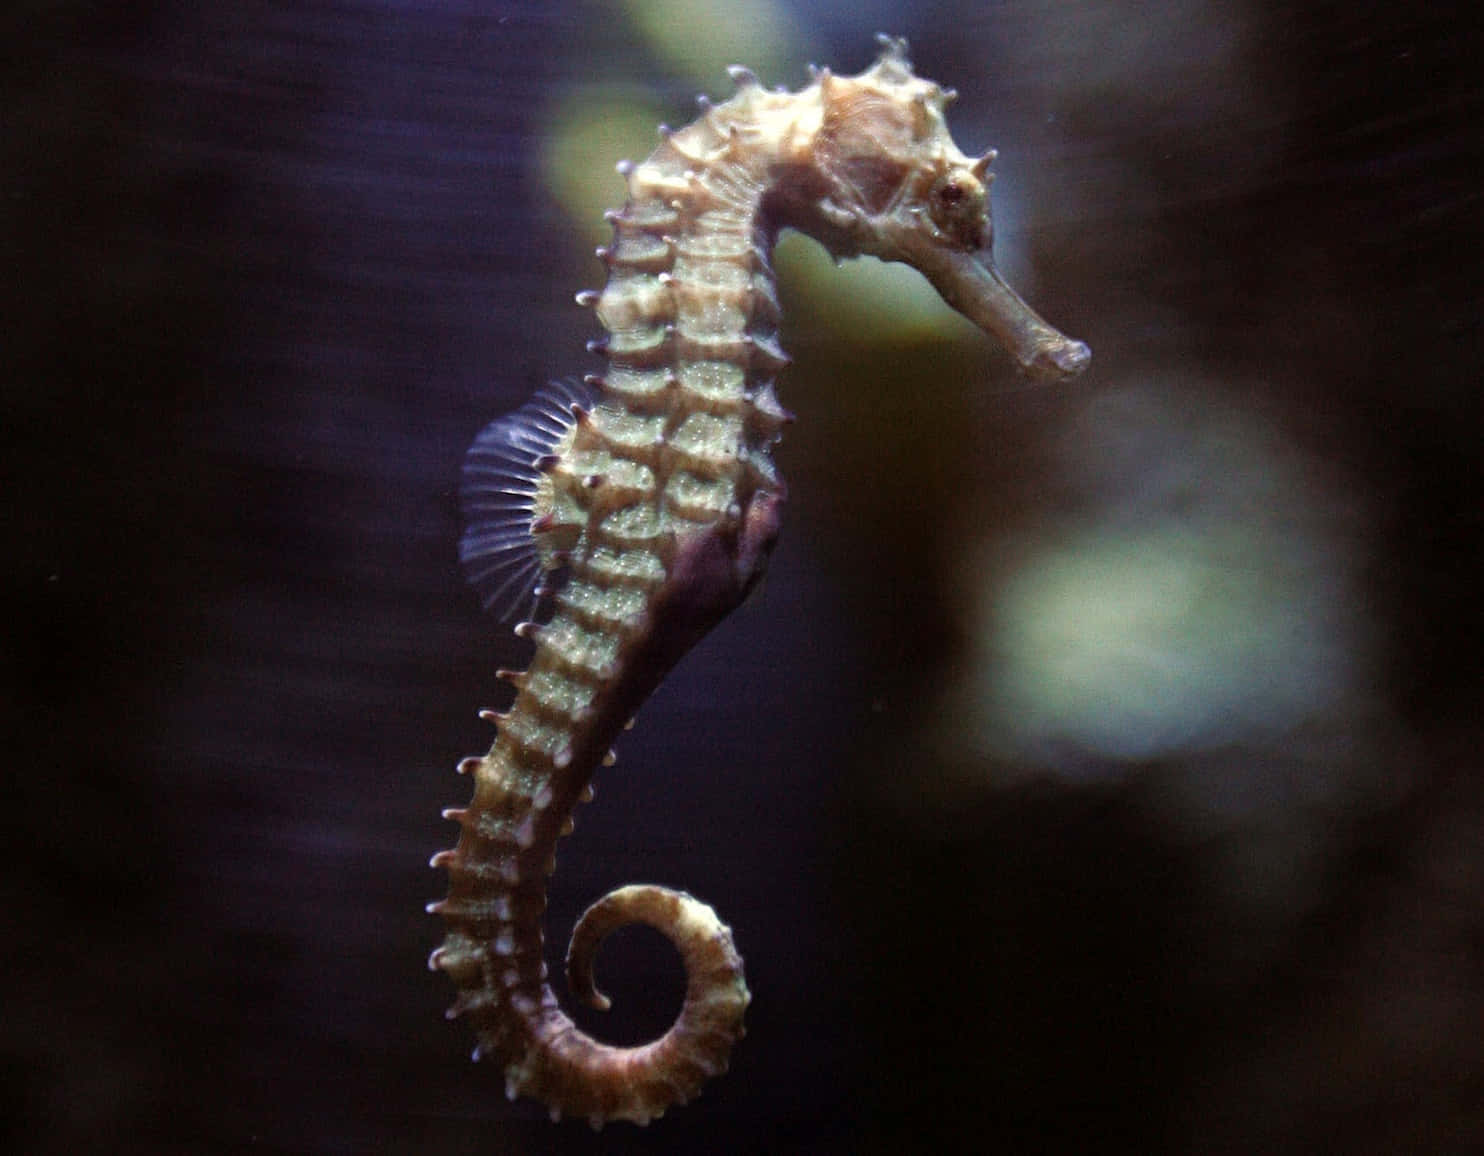 A seahorse swimming in the ocean, surrounded by seaweed